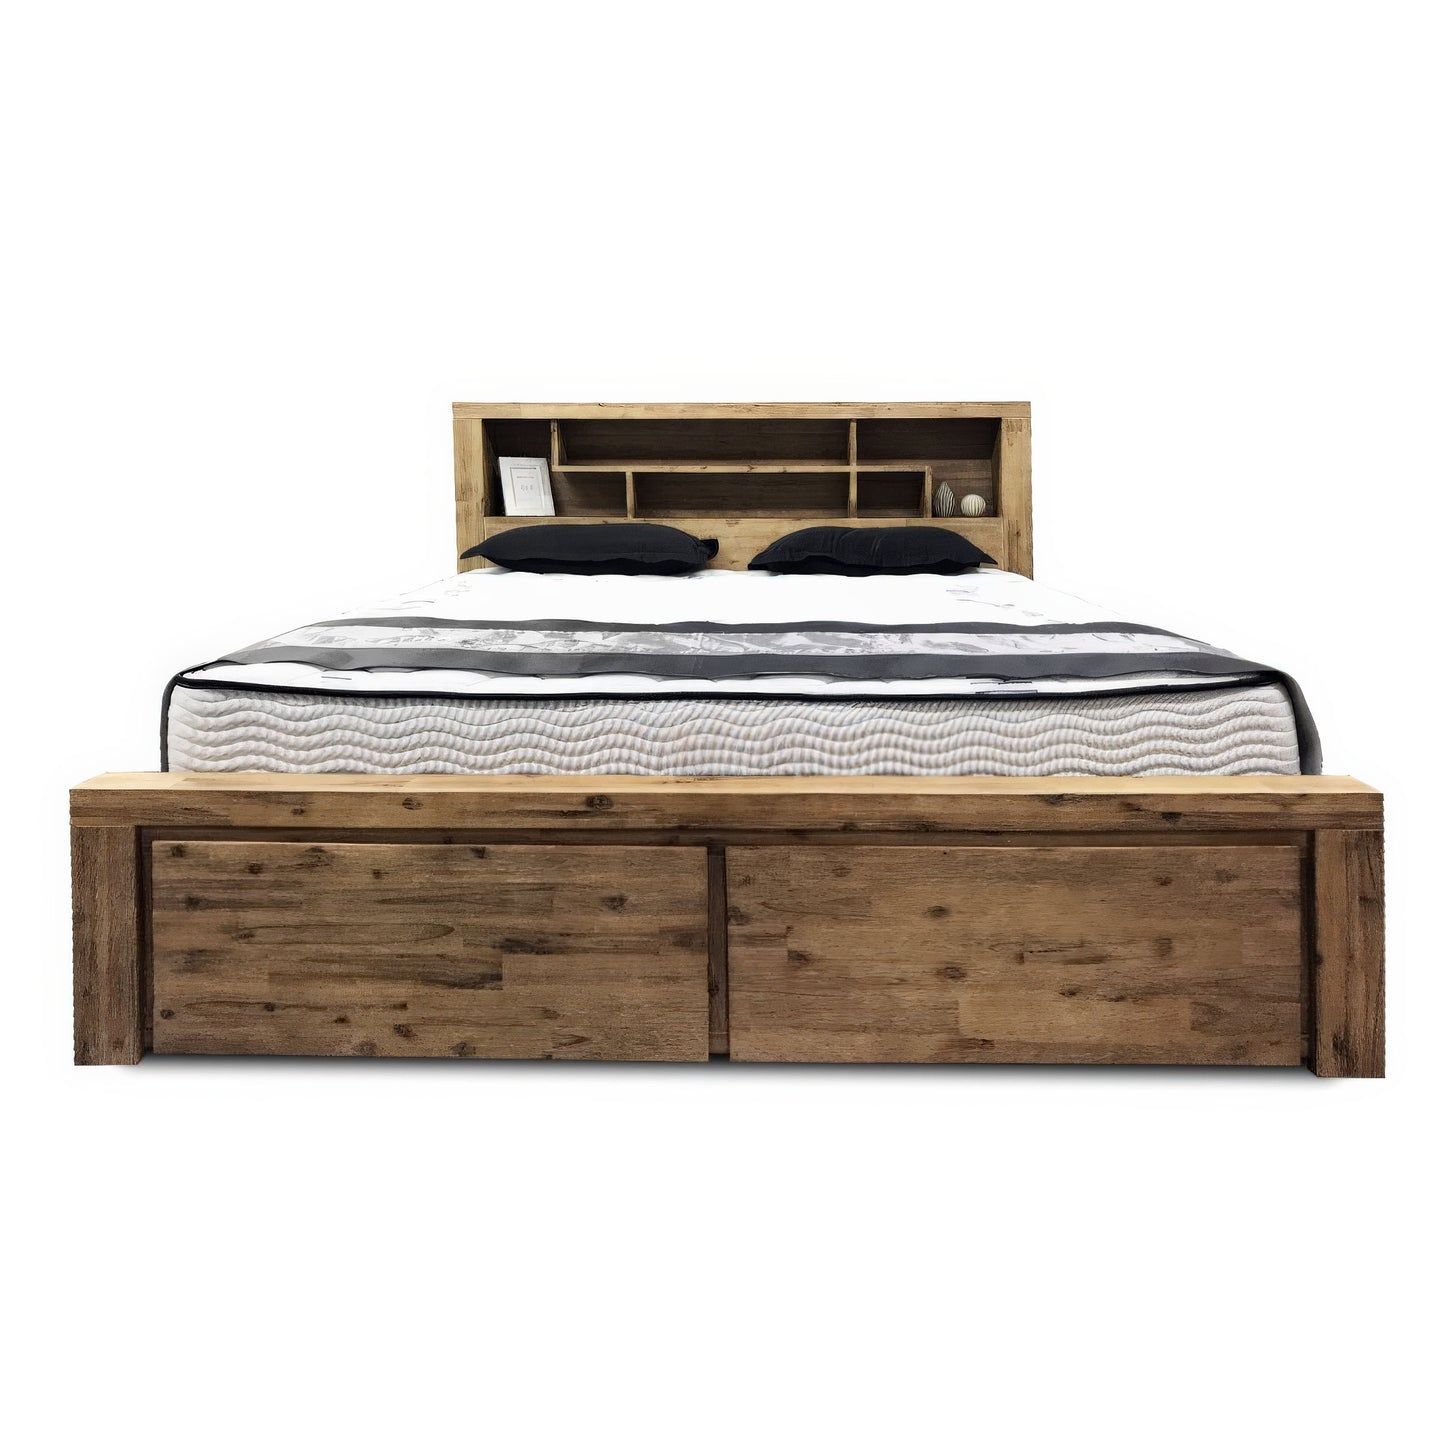 Baloo Bookcase Bed